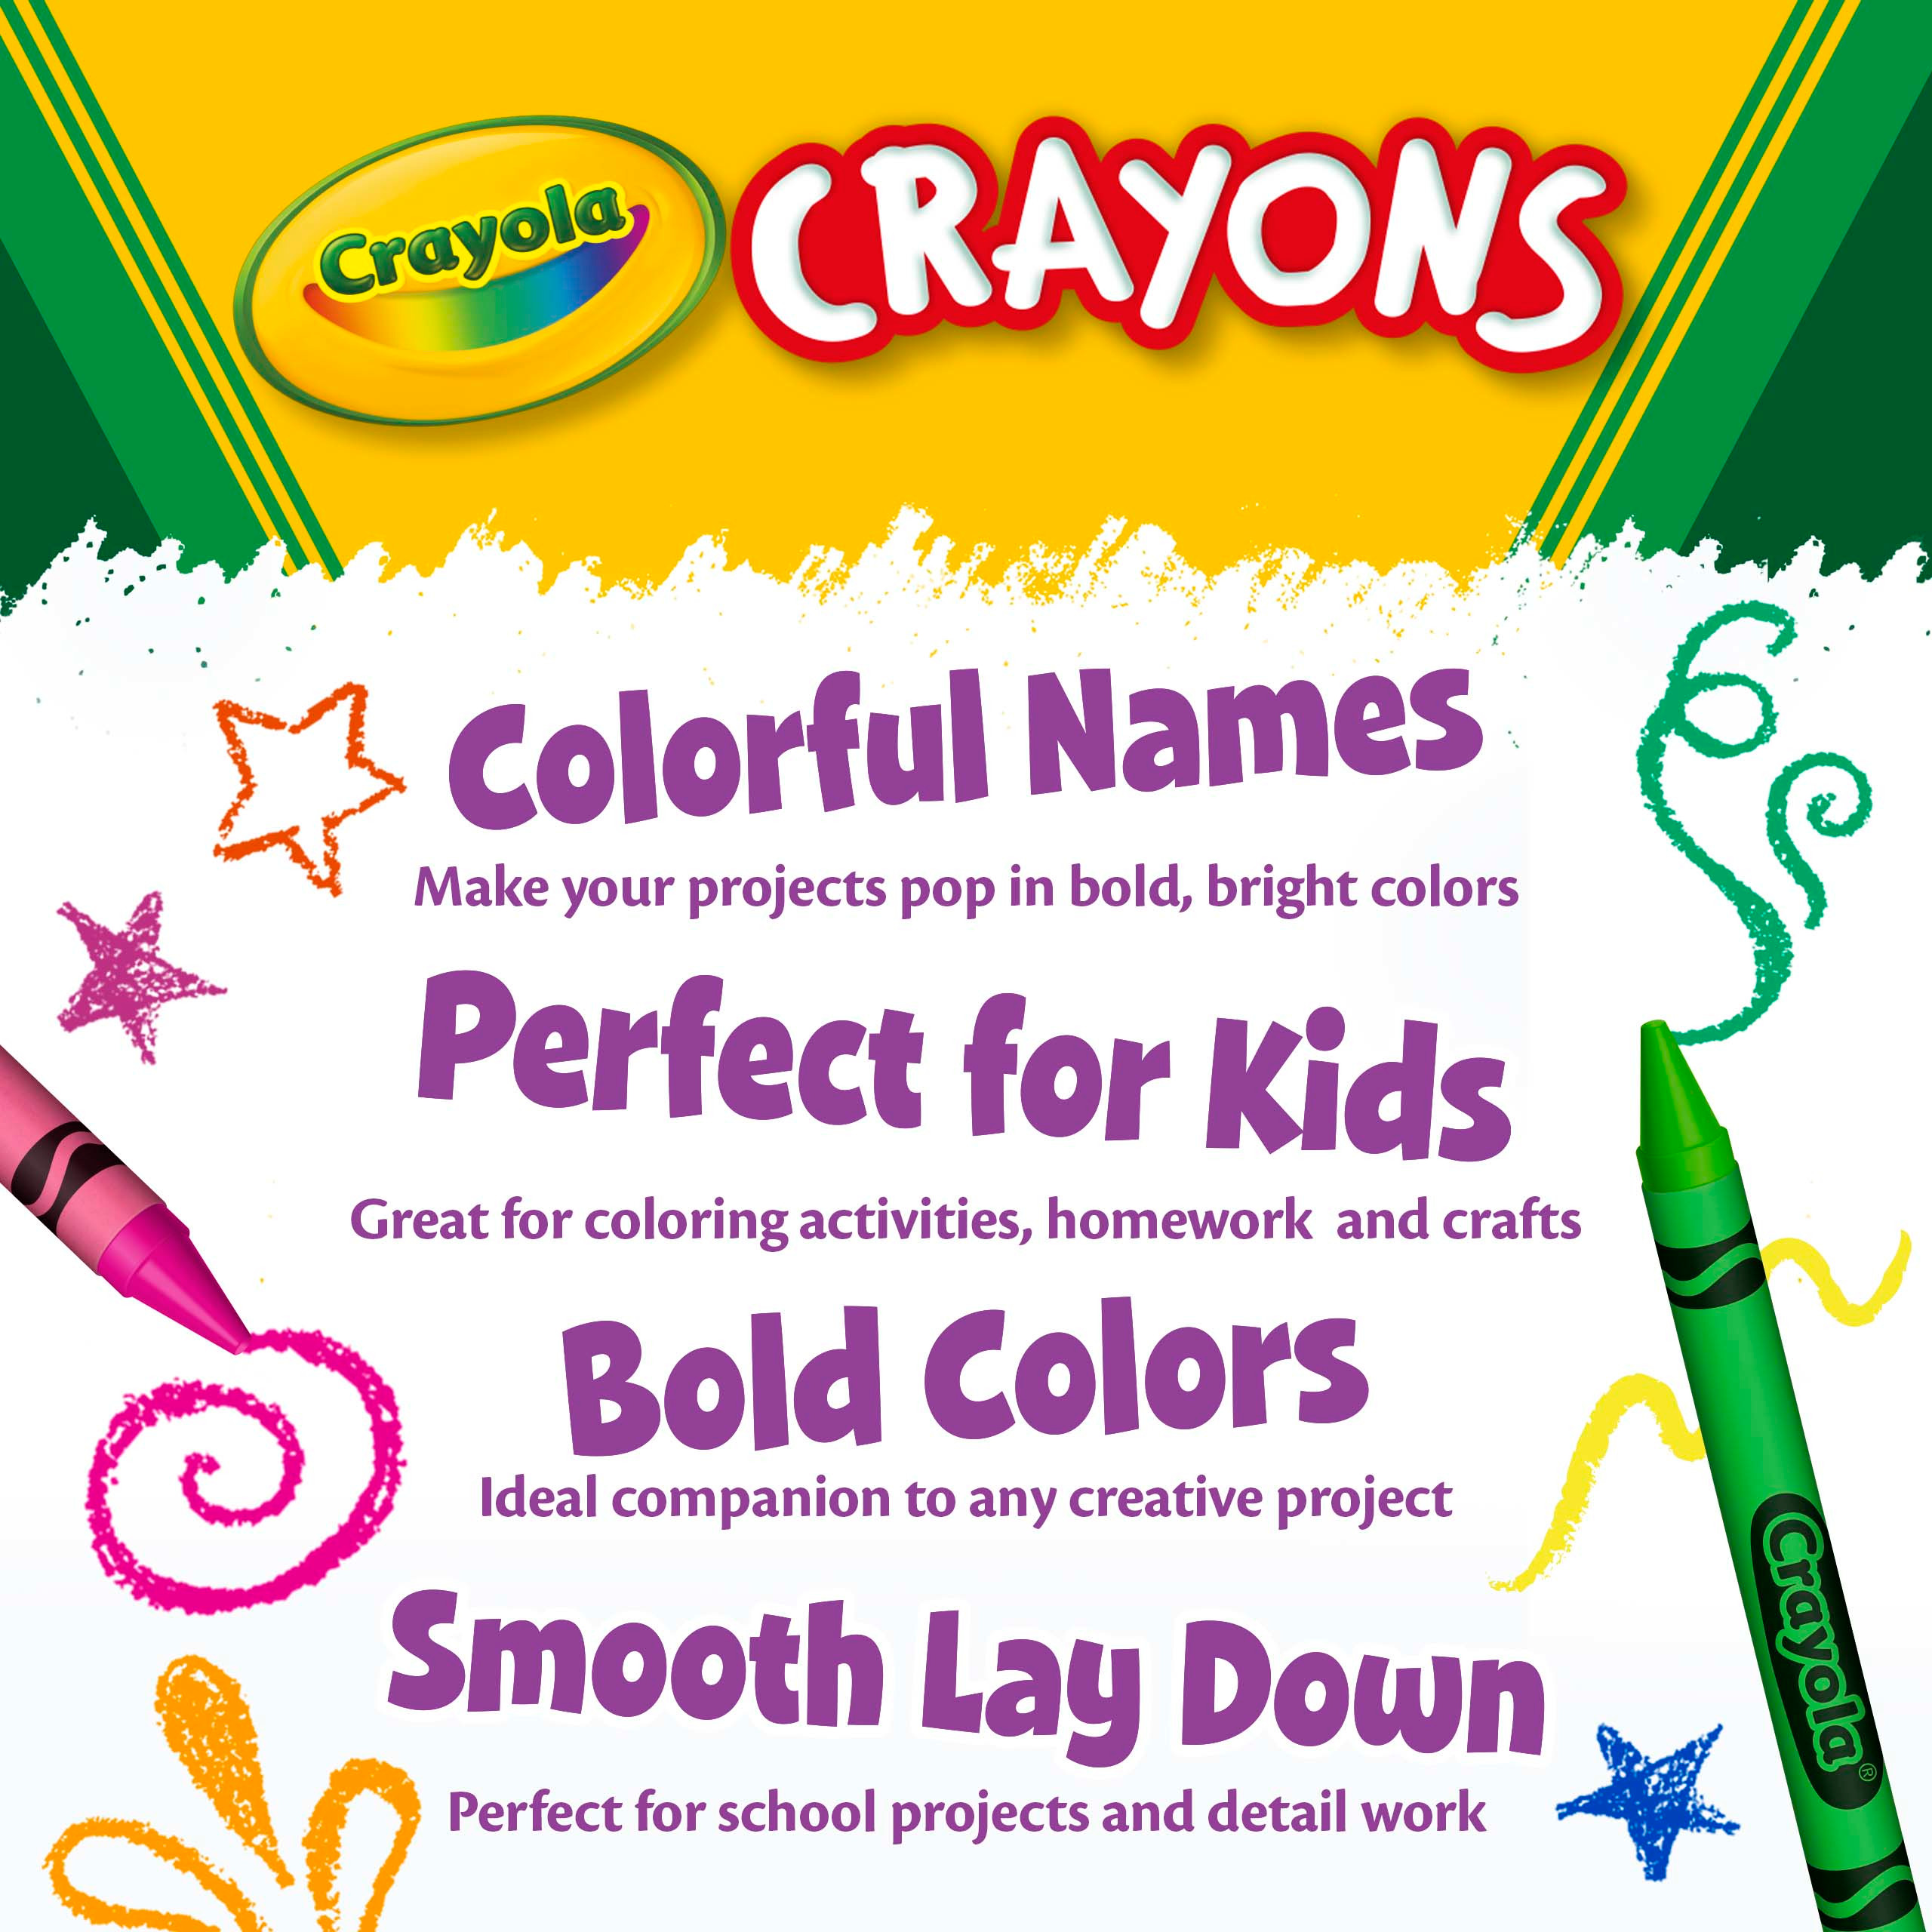 Crayola Classic Crayons, Back to School Supplies for Kids, 8 Ct, Art Supplies - image 8 of 10